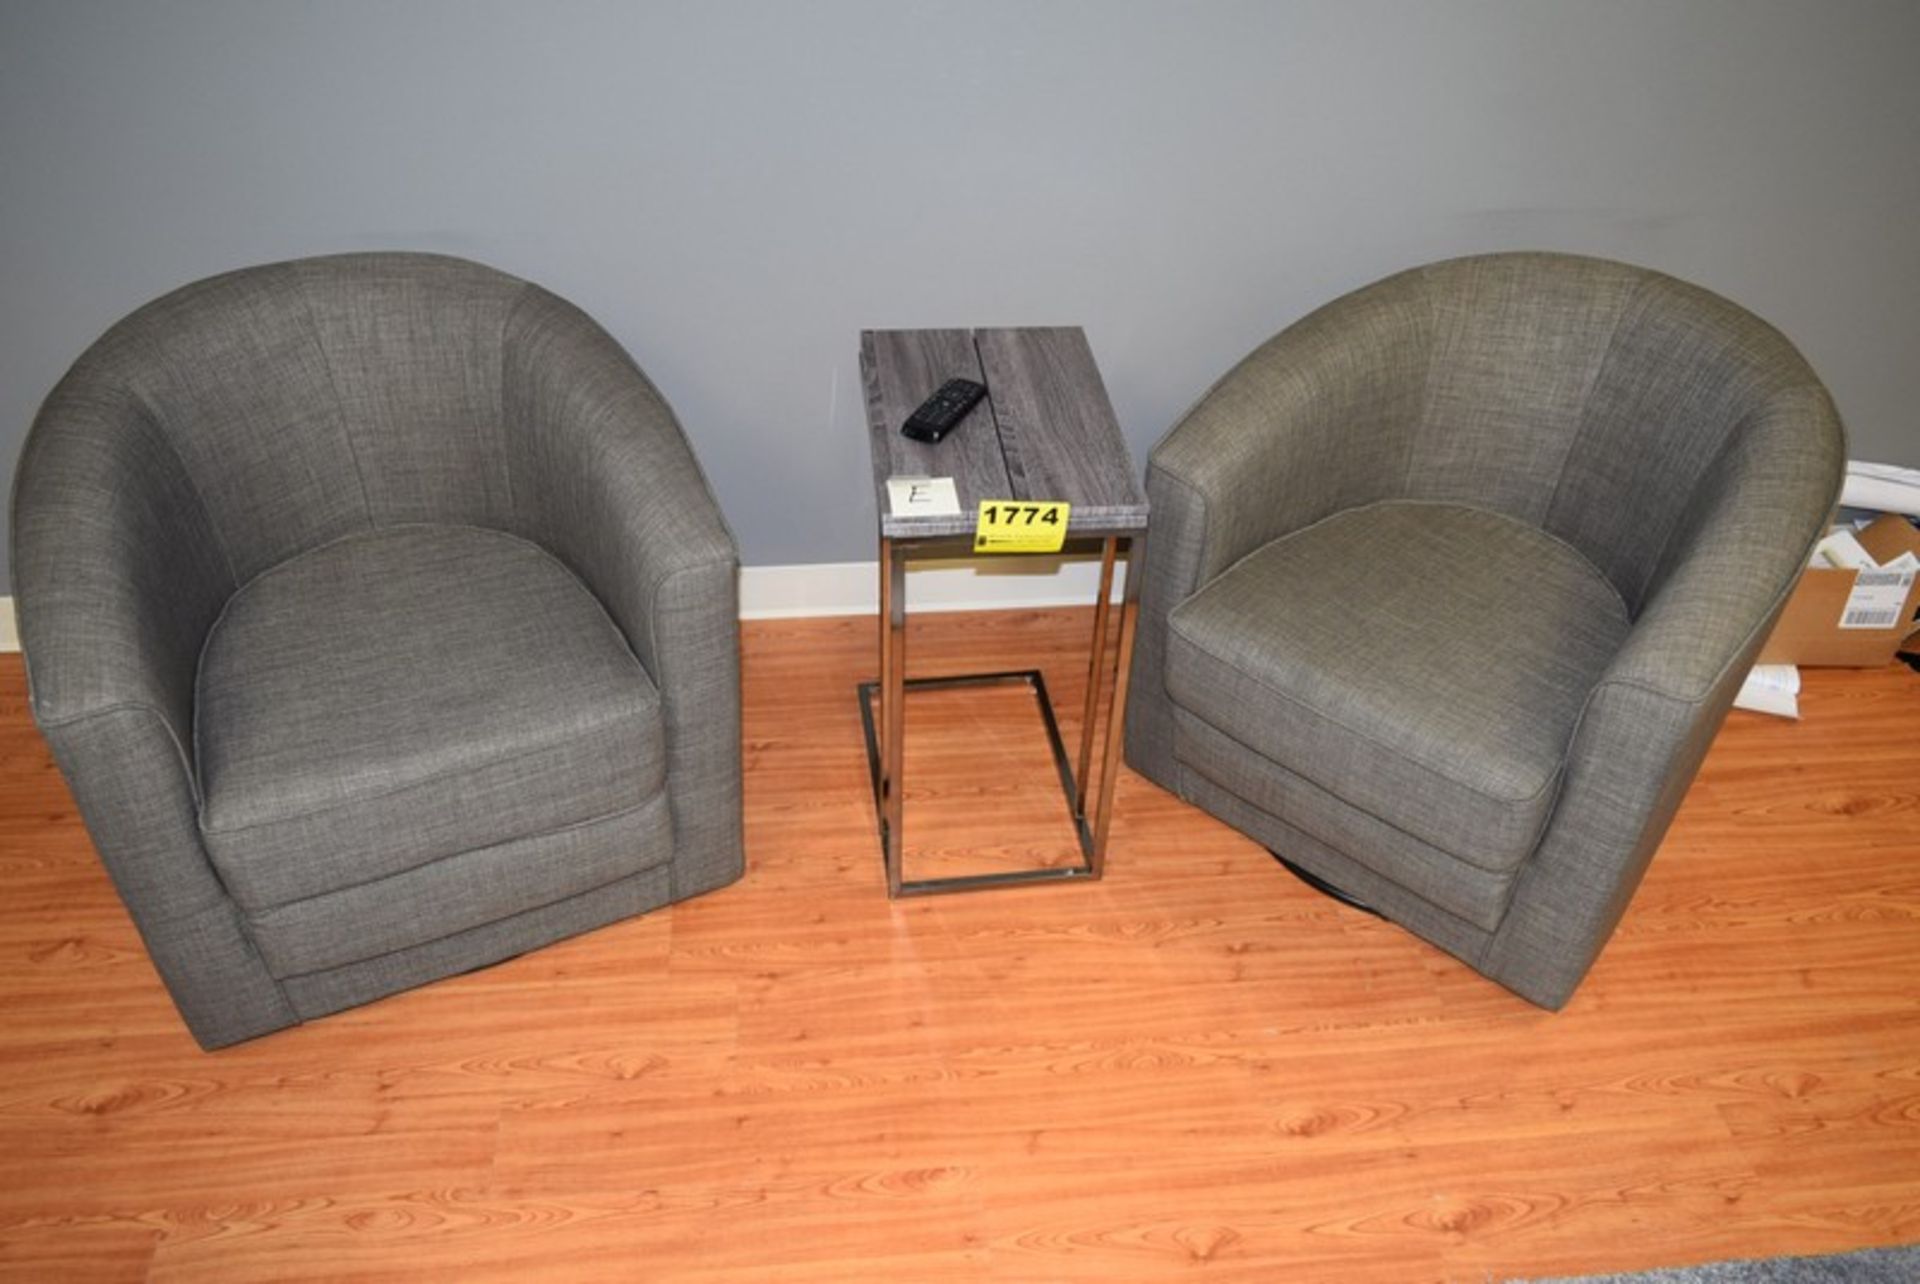 LOT: (2) WOOD FRAME CLOTH UPHOLSTERED SWIVEL SIDE CHAIRS, (1) METAL FRAME WOOD TOP SIDE TABLE WITH